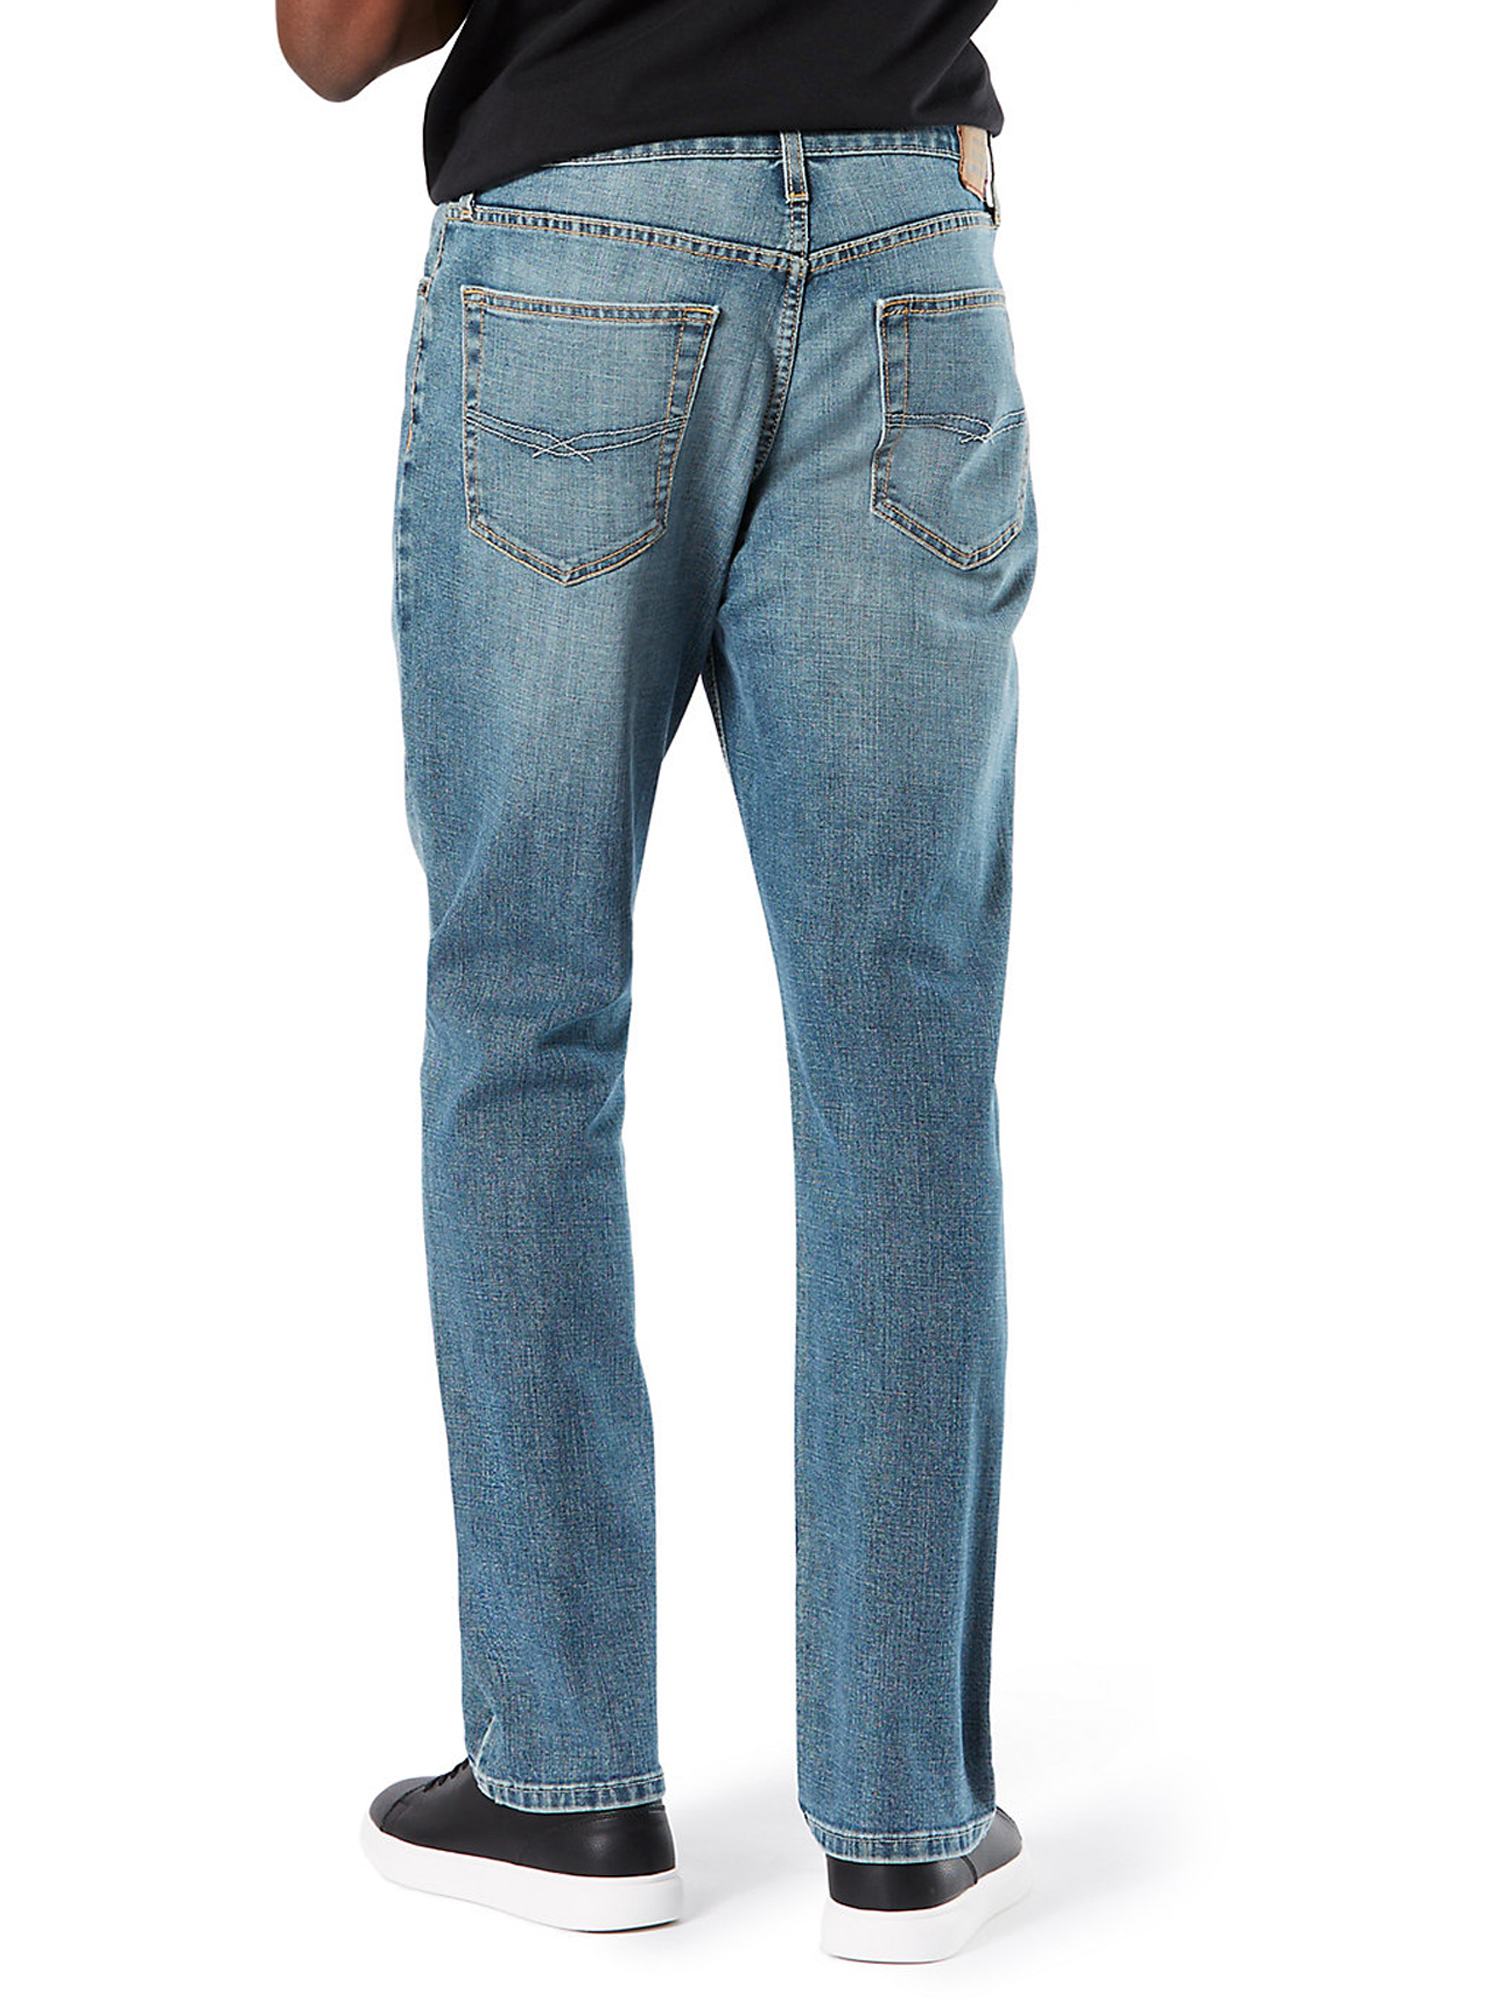 Signature by Levi Strauss & Co. Men's and Big and Tall Athletic Fit Jeans - image 3 of 5